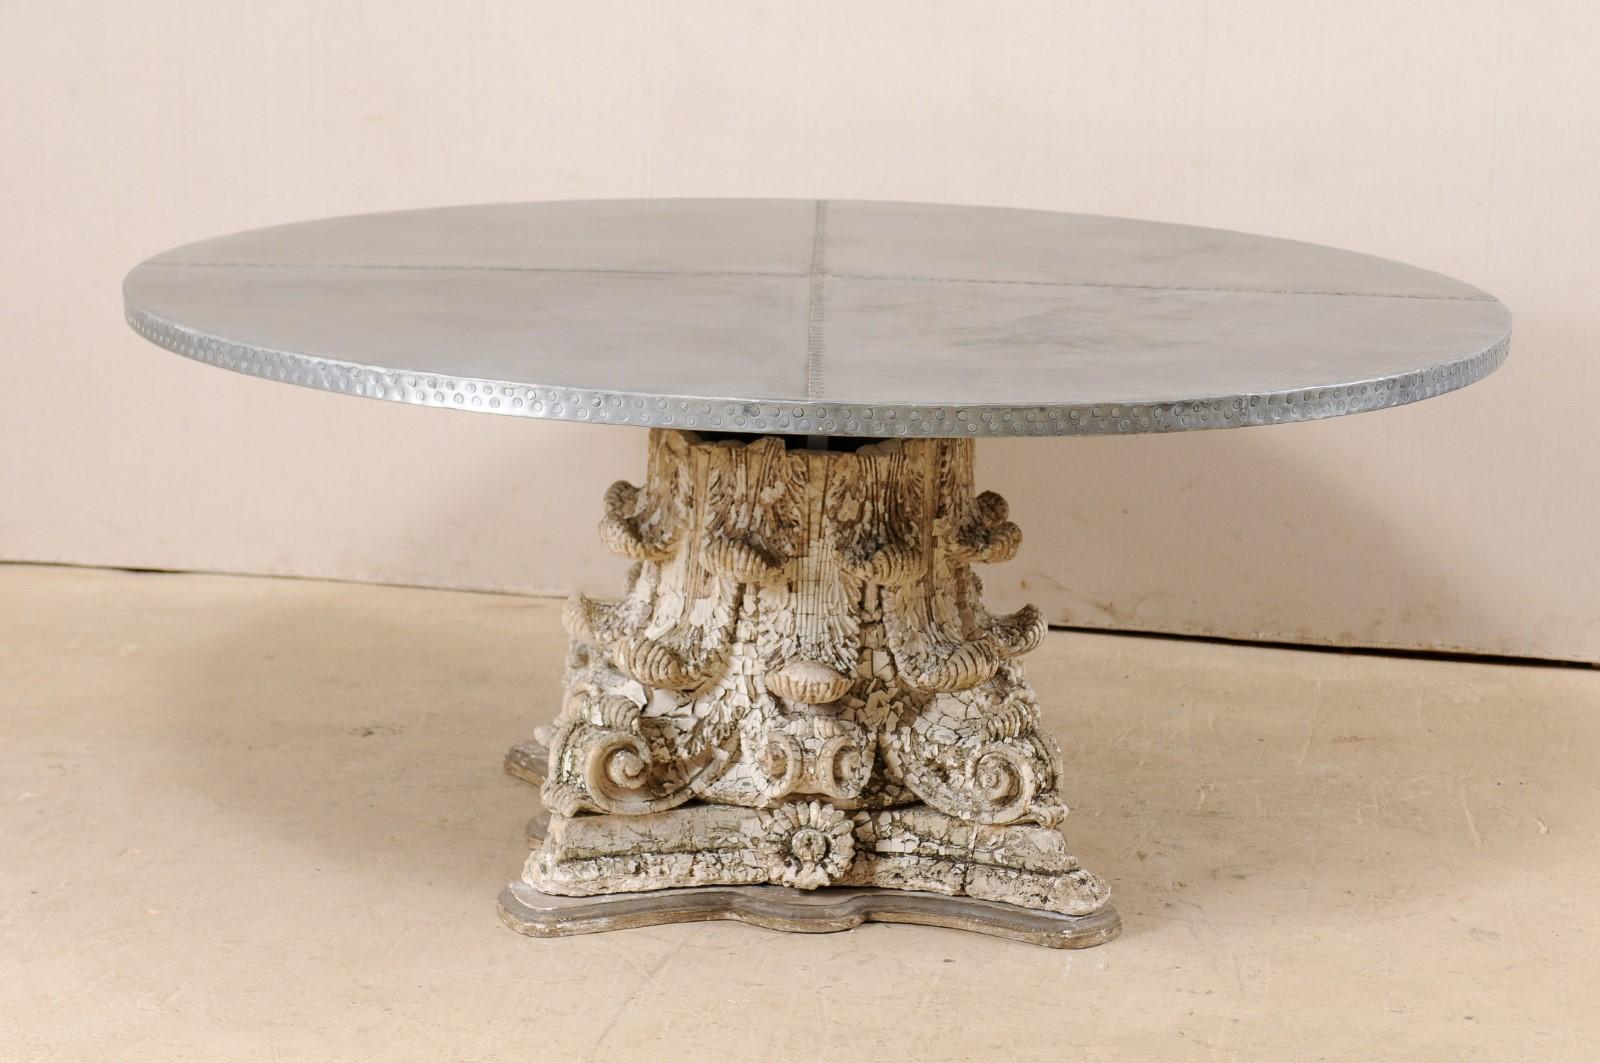 A custom zinc top and early 20th century capital base dining table. This fabulous custom table has been fashioned from the base of an antique American plaster and terracotta column, heavily adorn in acanthus leaf motif, topped with the addition of a